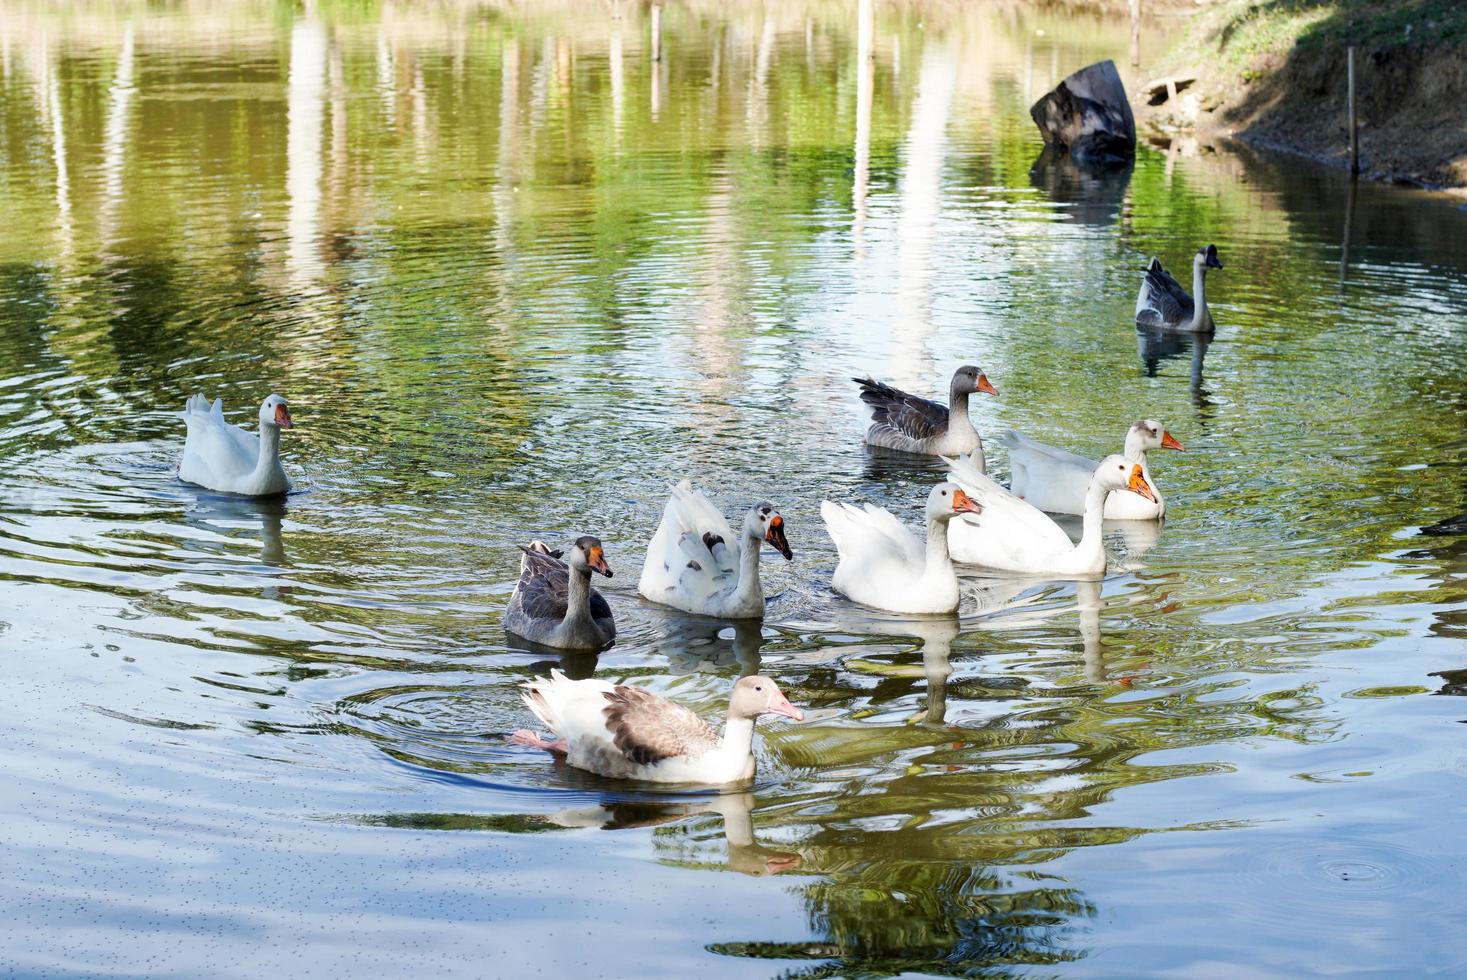 Geese in a lake photo